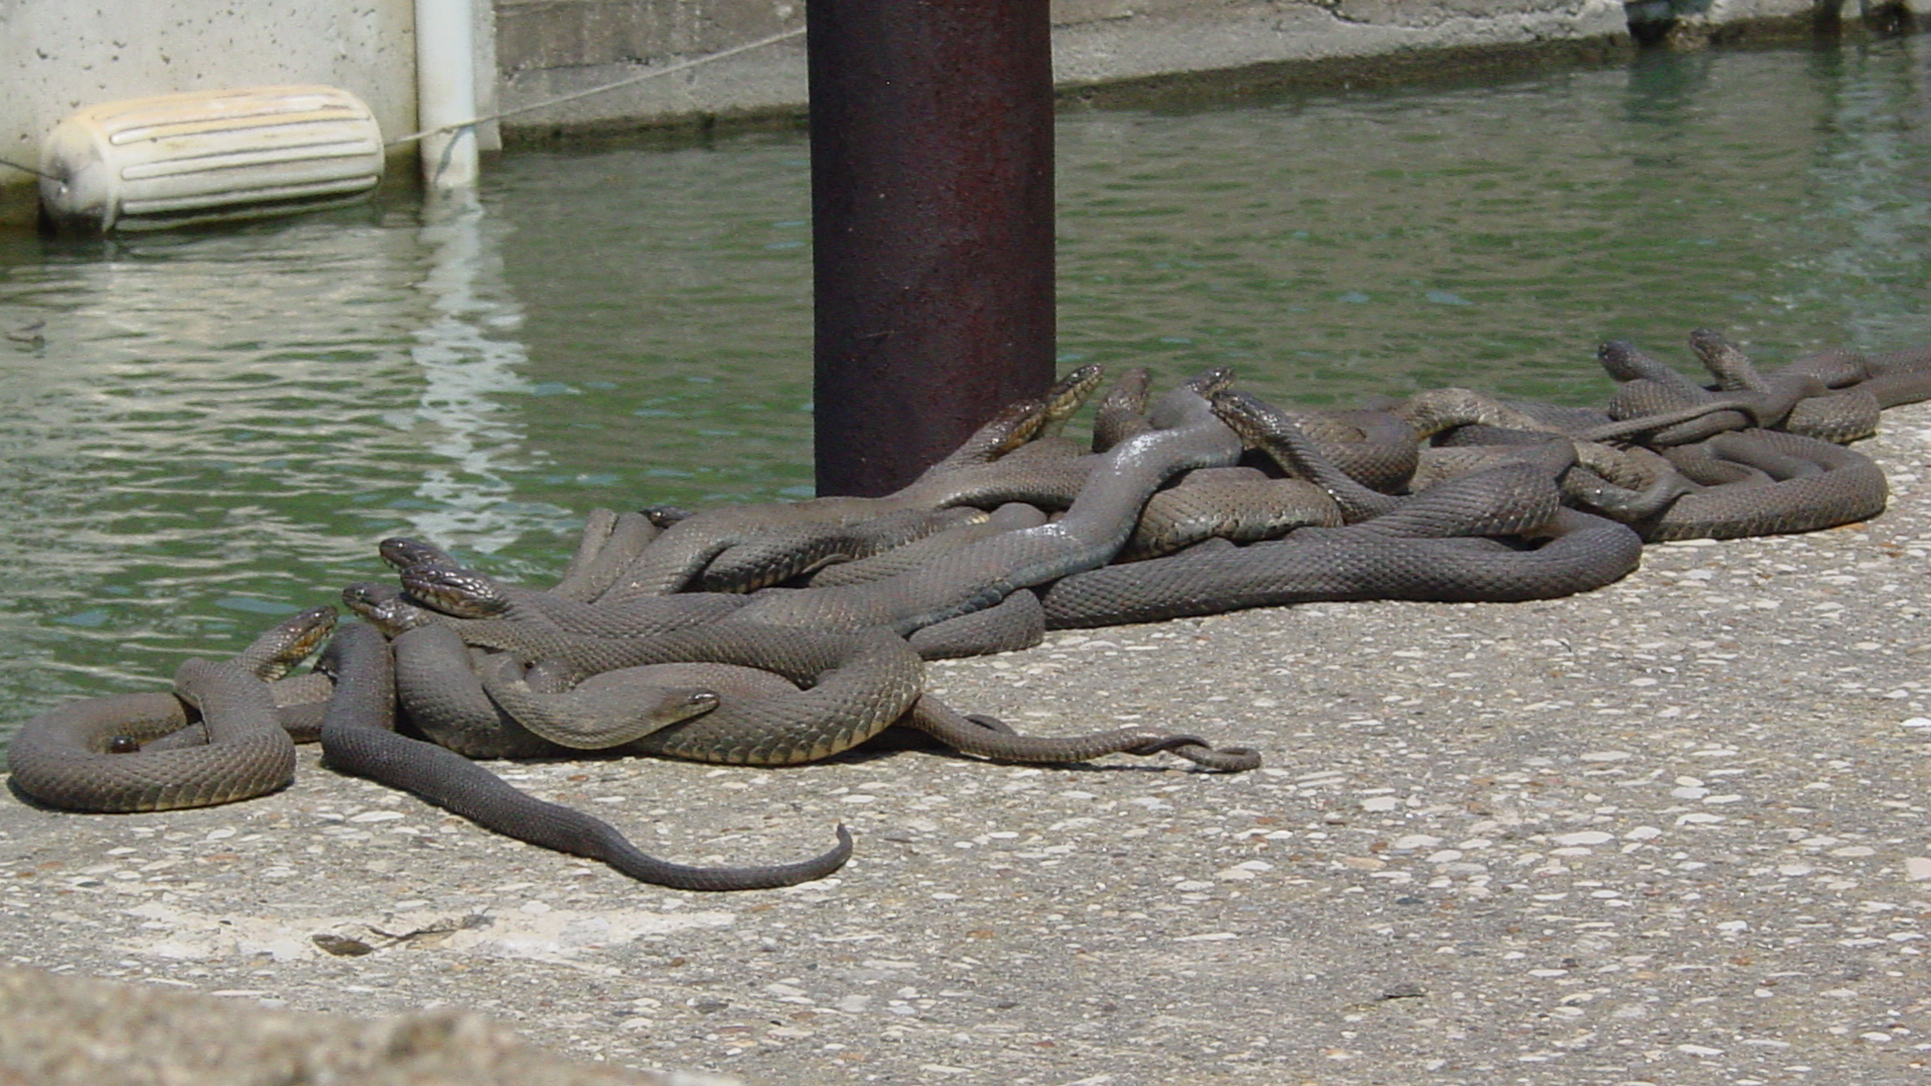 Lake Erie watersnake mating congregation. Courtesy of Dr. Kristin Stanford, Ohio Sea Grant and Stone Laboratory